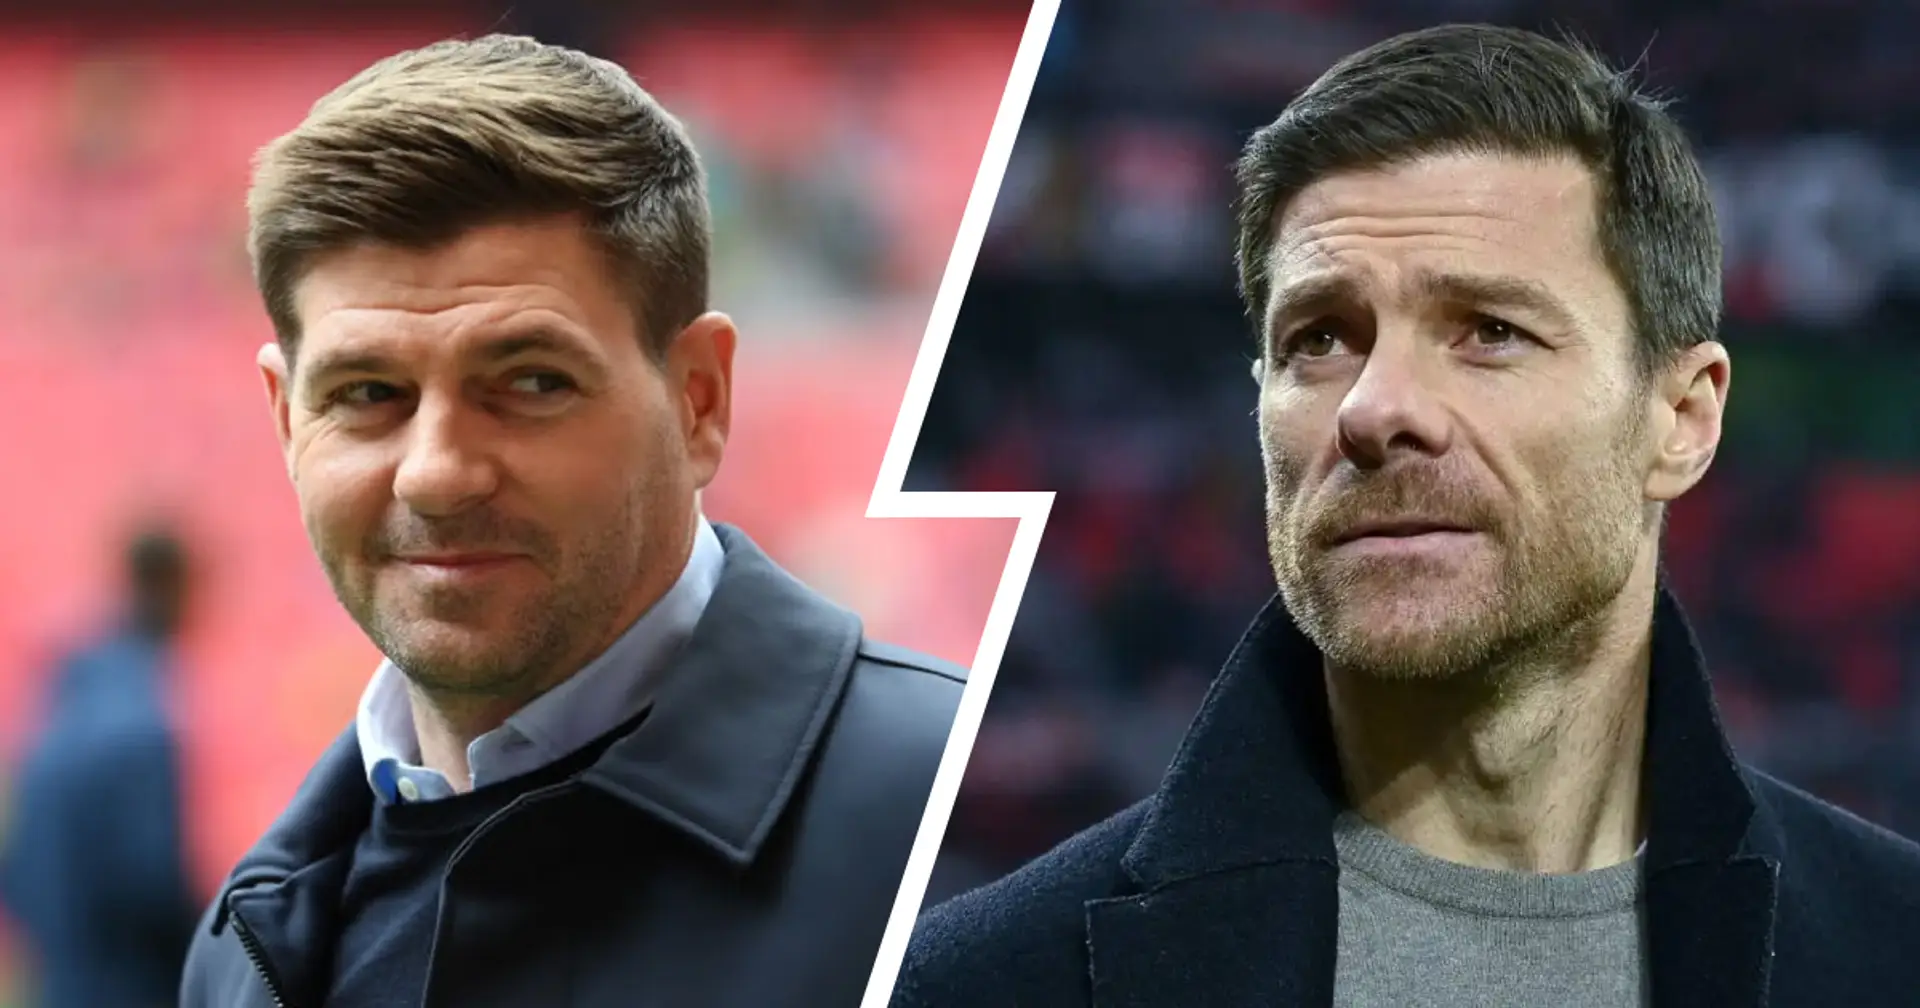 'He has experience under his belt': Liverpool told to appoint Gerrard ahead of Alonso